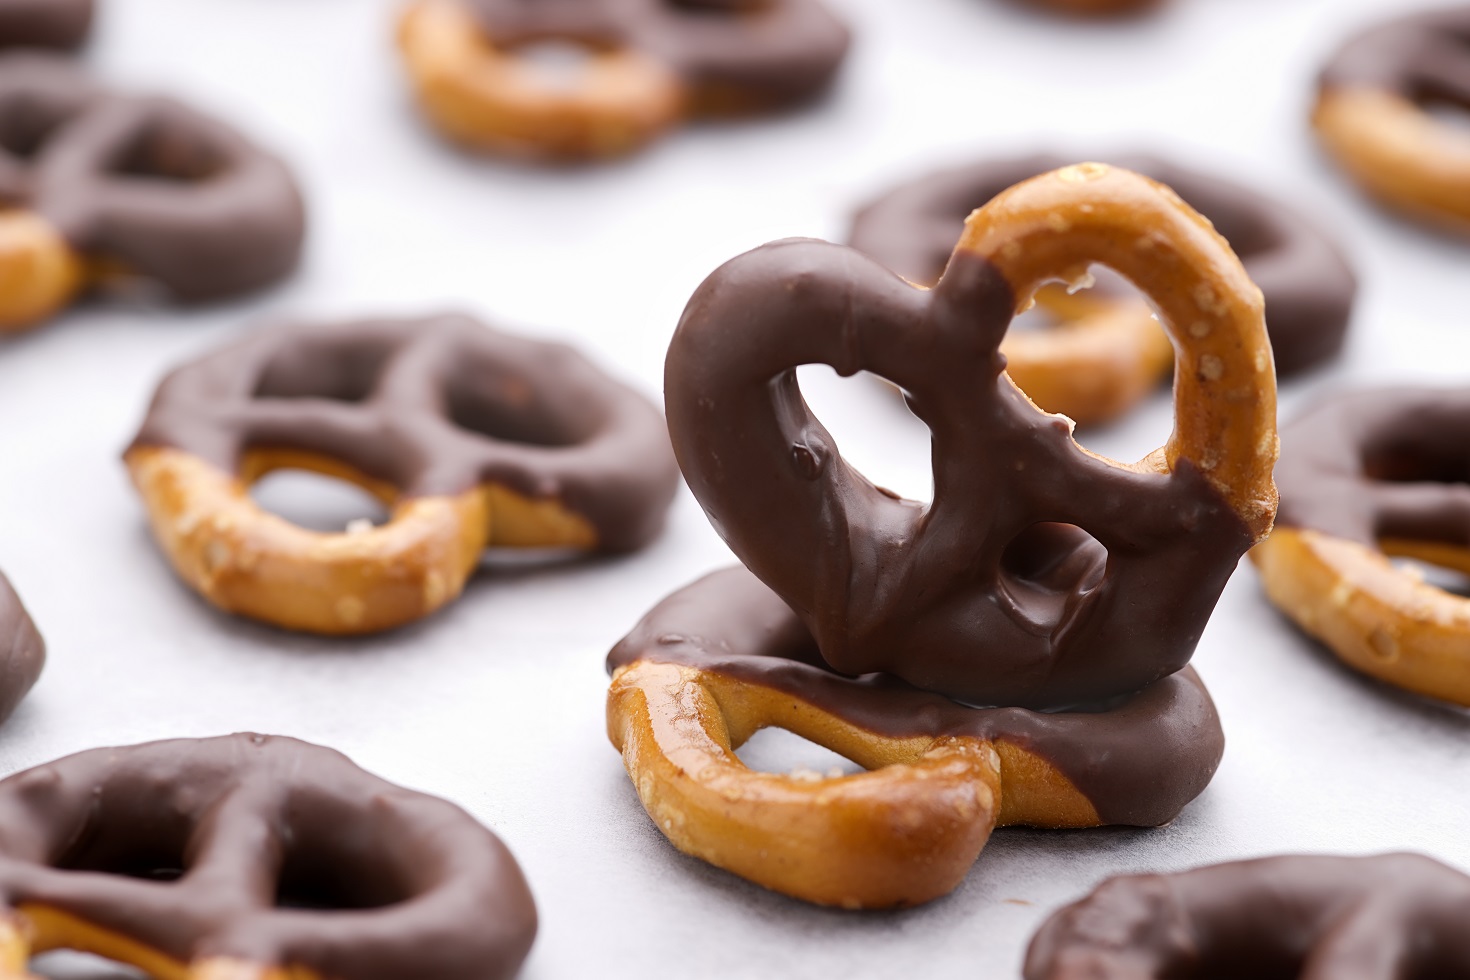 Exploring the Craveable Crunch of Chocolate Covered Pretzels